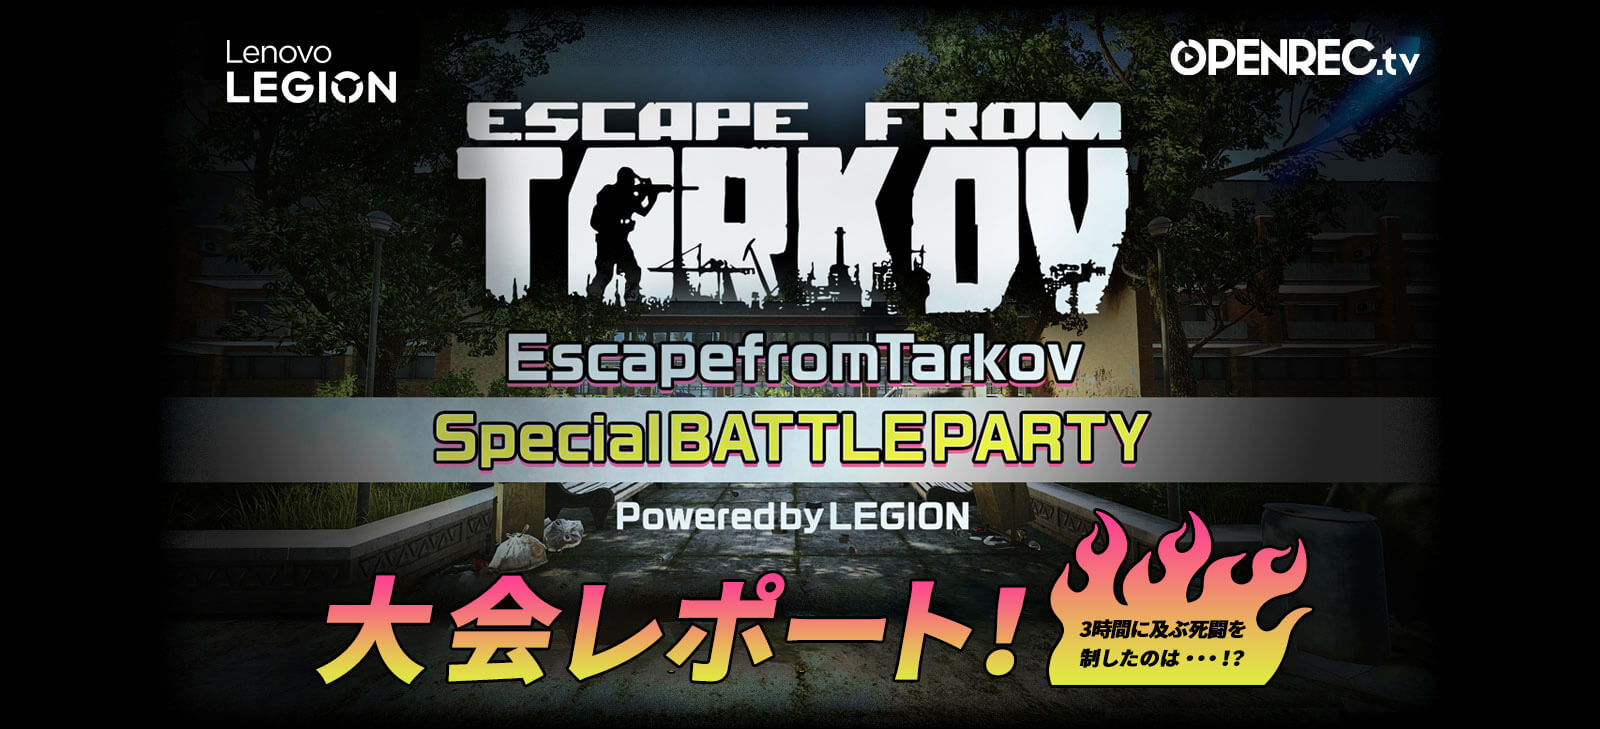 EscapefromTarkov SpecialBATTLEPARTY powered by Legion 大会レポート